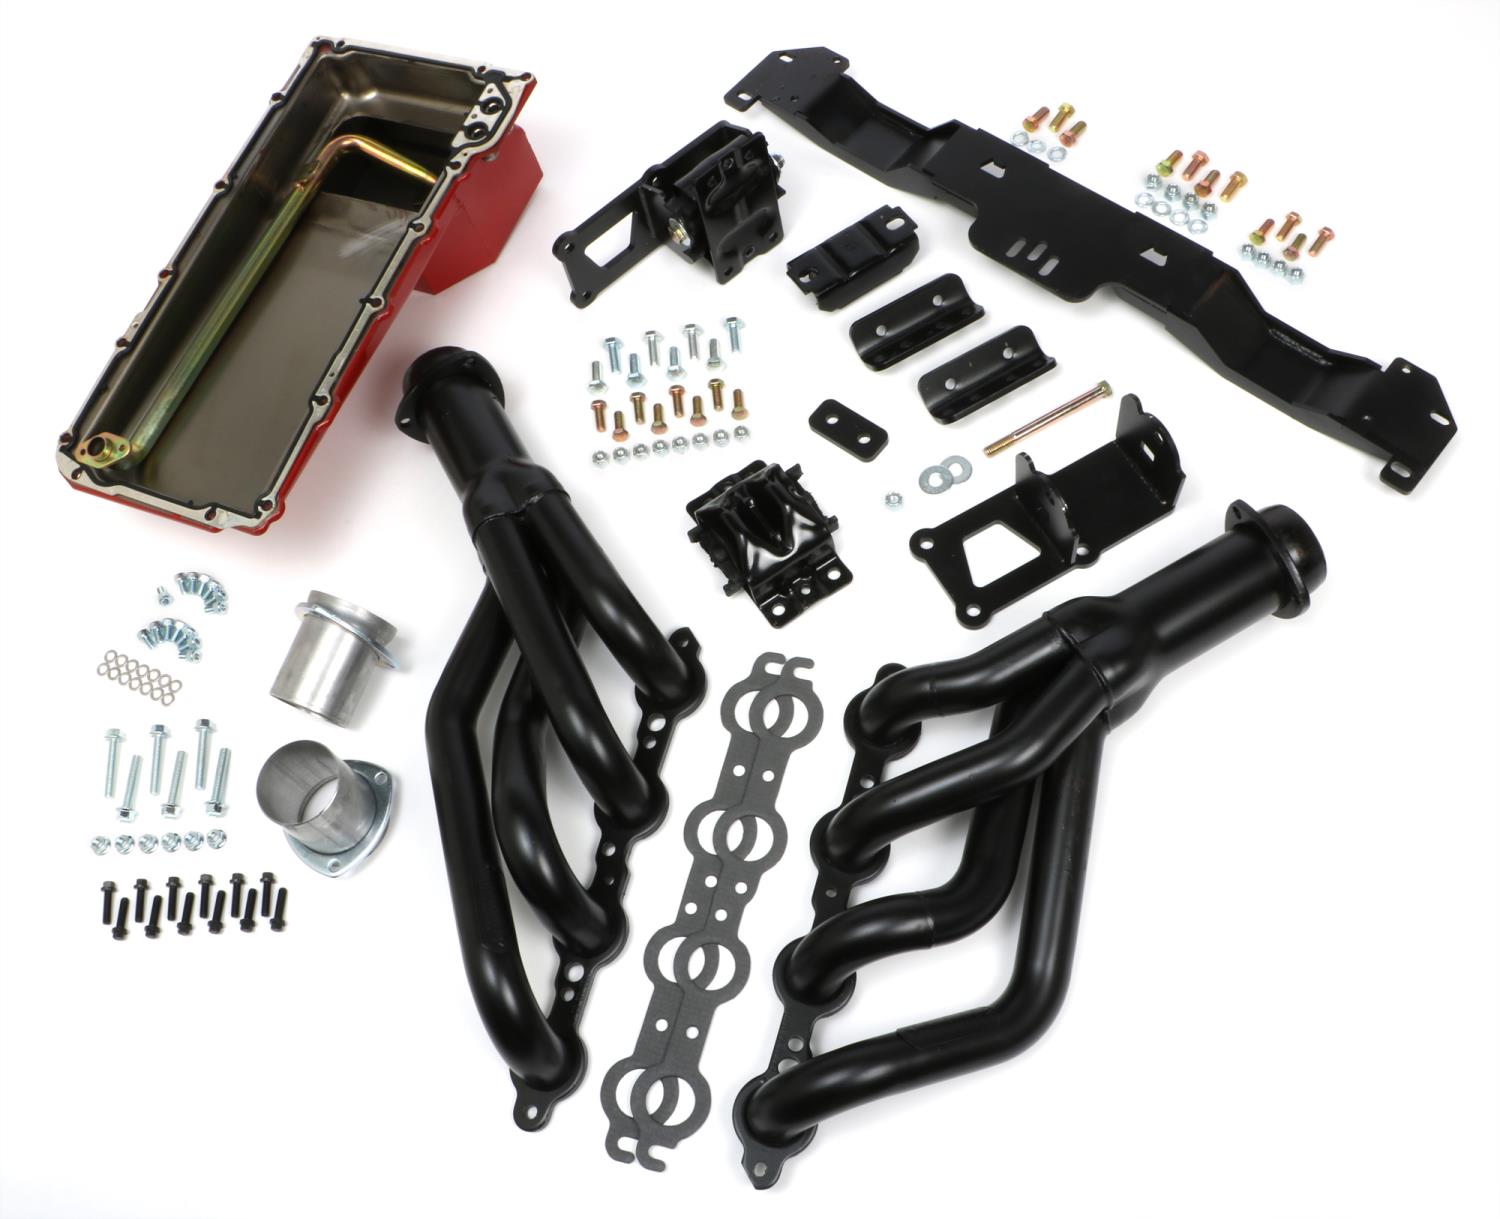 42031 Engine Swap-In-A-Box Kit for GM LS (Gen III/IV) and Automatic Transmission, 1975-1981 GM F-Body Cars